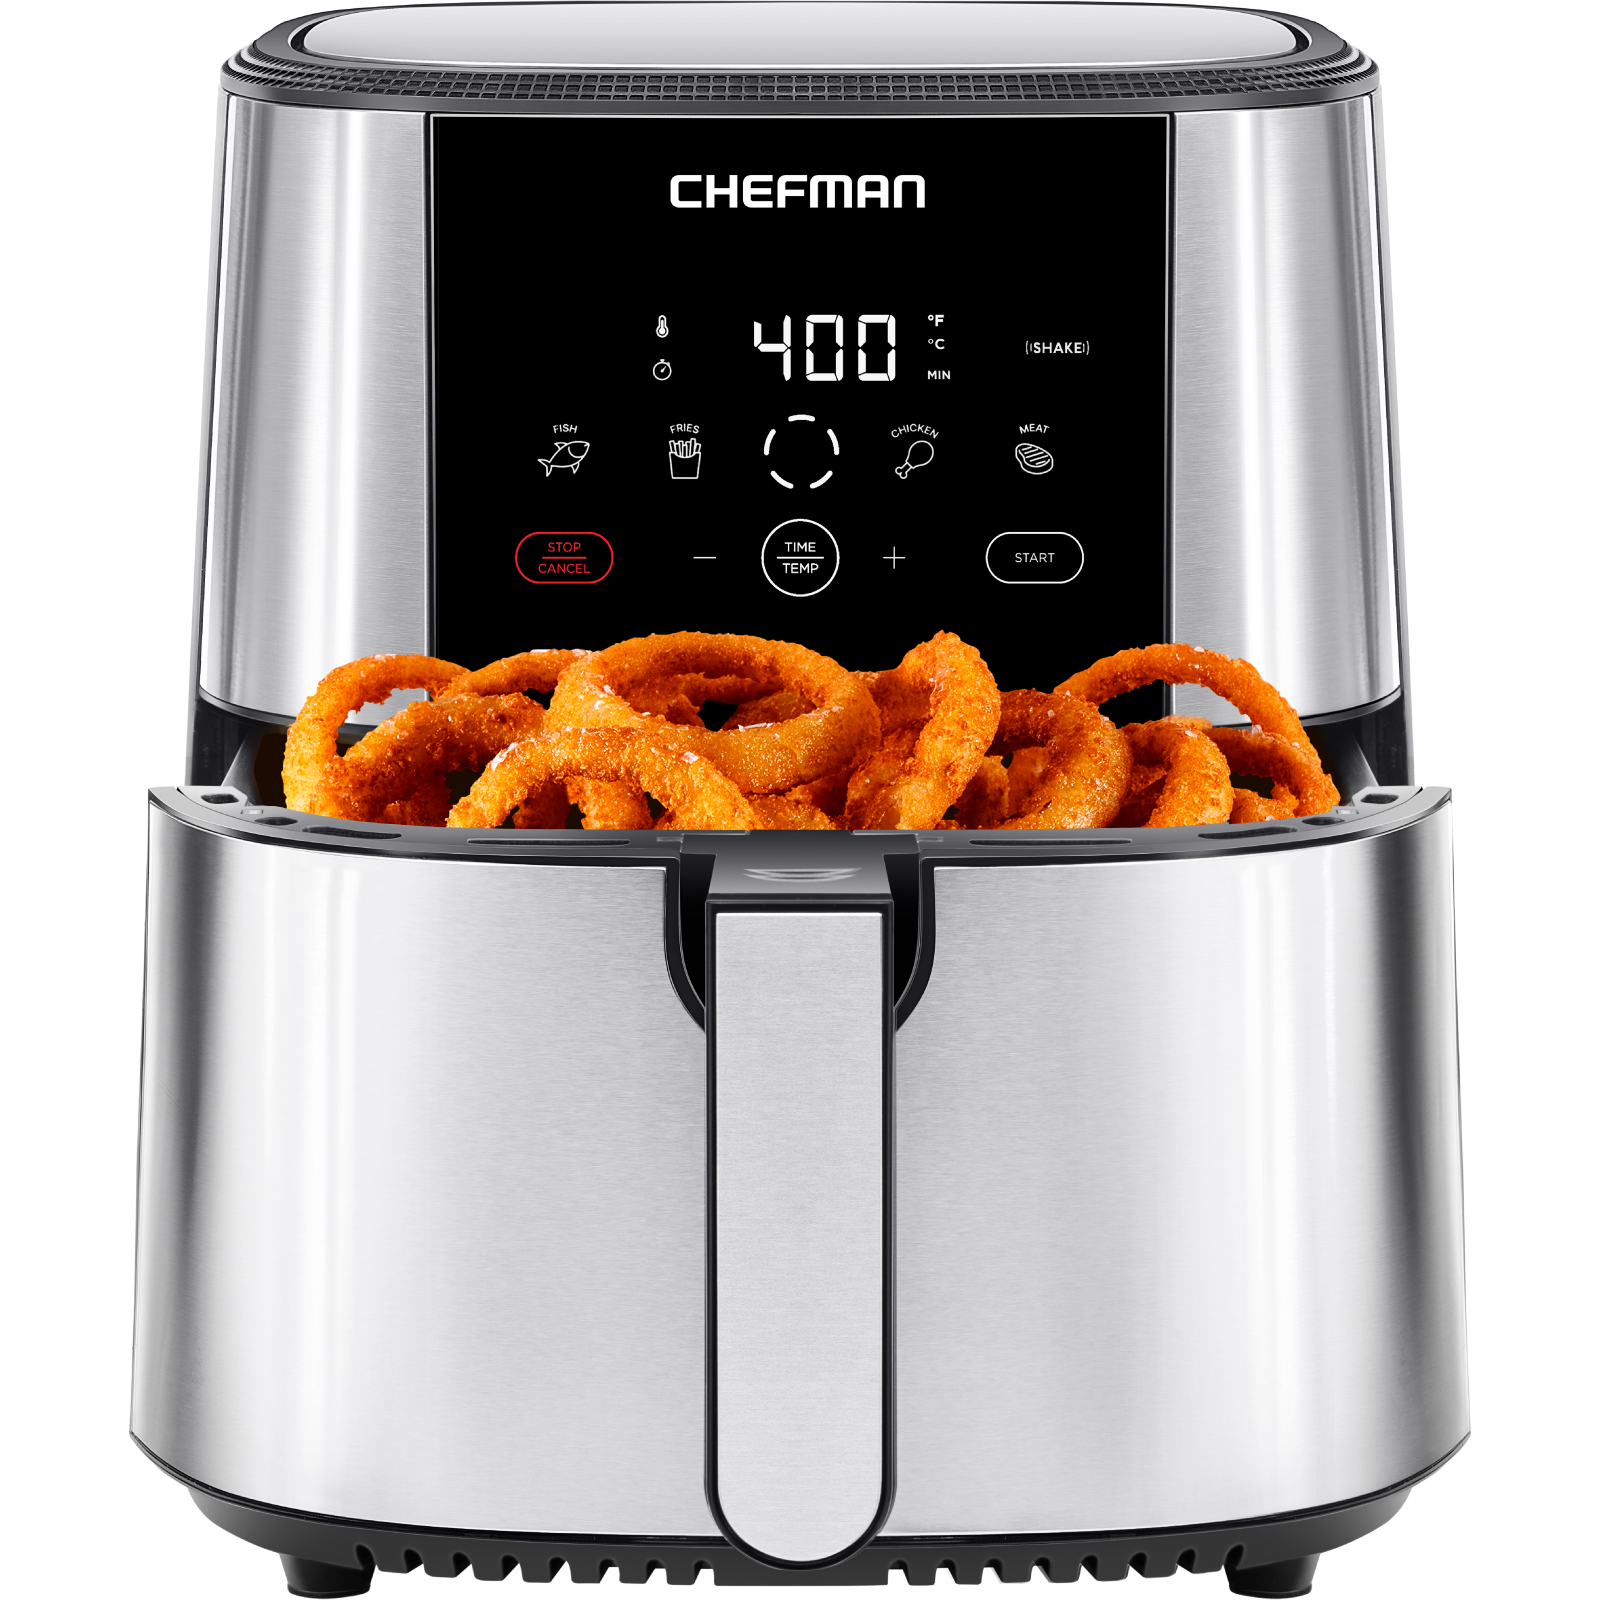 Chefman Turbofry Air Fryer w/ Digital Controls, 8 Qt Capacity - Stainless Steel, New - image 1 of 7